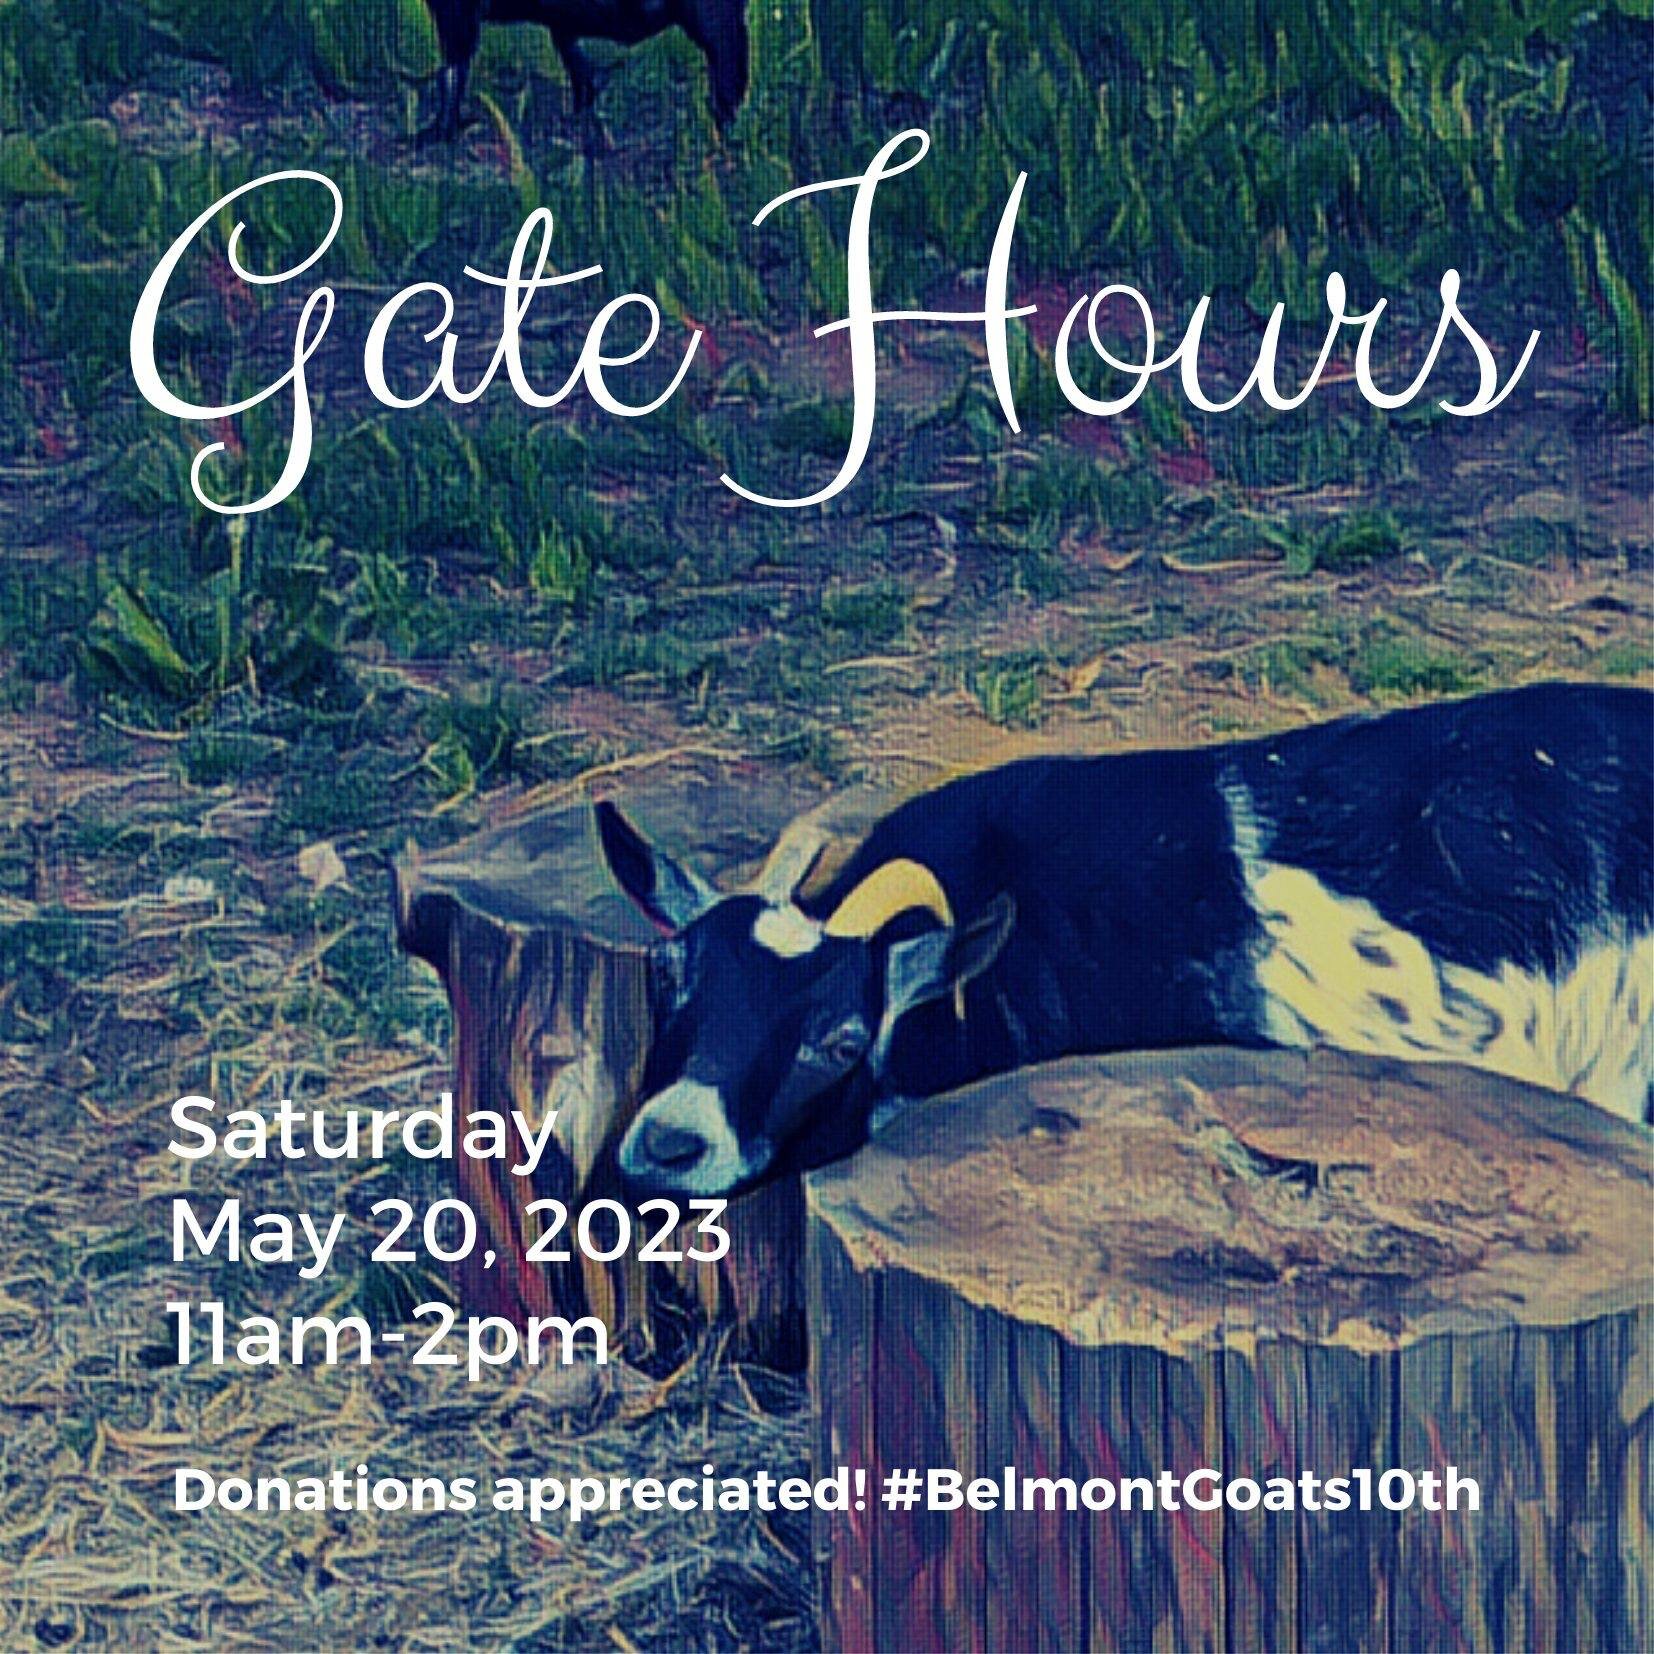 Gate hours today are from 11am to 2pm. Please read our rules sign on your way in! Children: with a parent or guardian. Dogs: no. Please do not visit if you are sick. Donations are not required but are appreciated!

#BelmontGoats10th #ThisIsPortland #